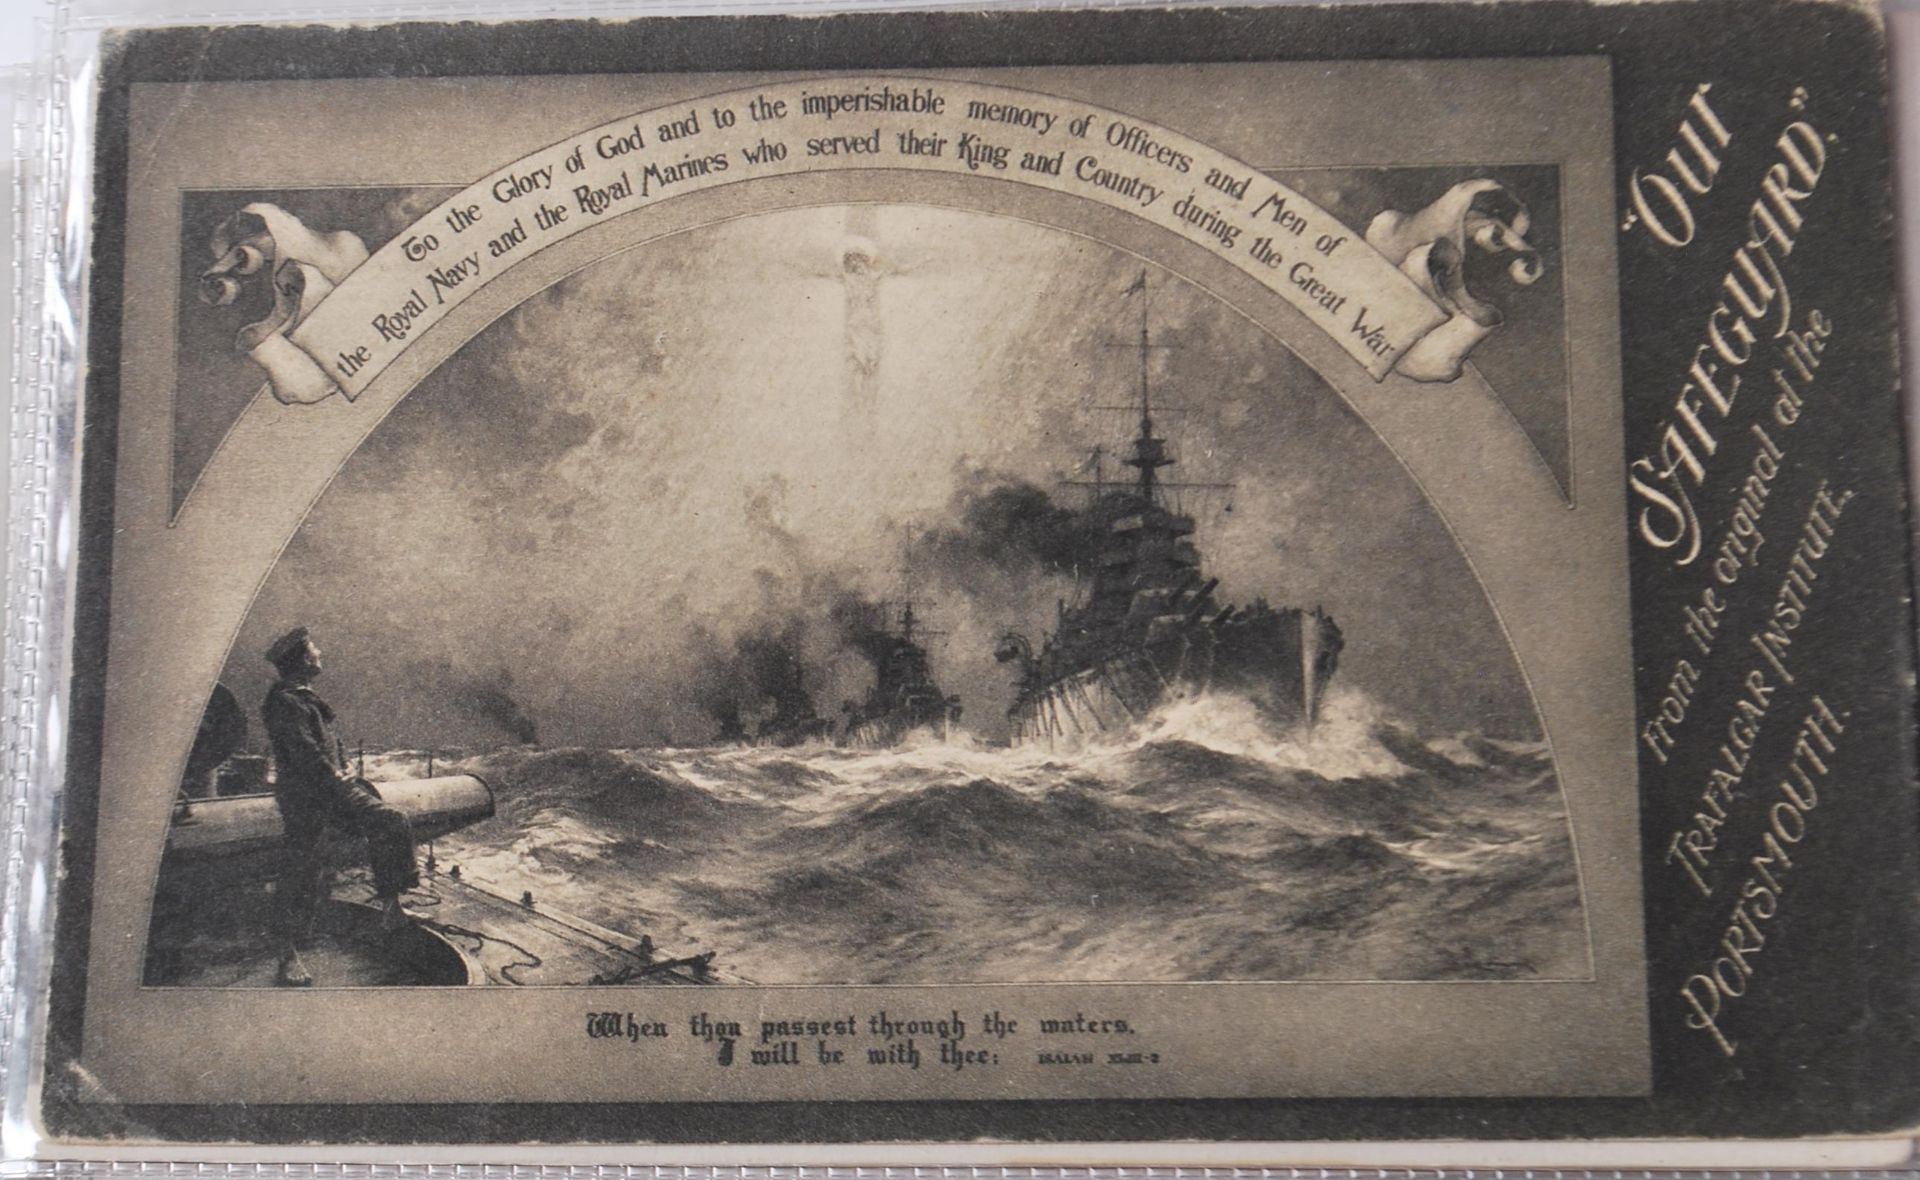 WWI FIRST WORLD WAR & WWII NAVY / SUBMARINE RELATED POSTCARDS - Image 8 of 8